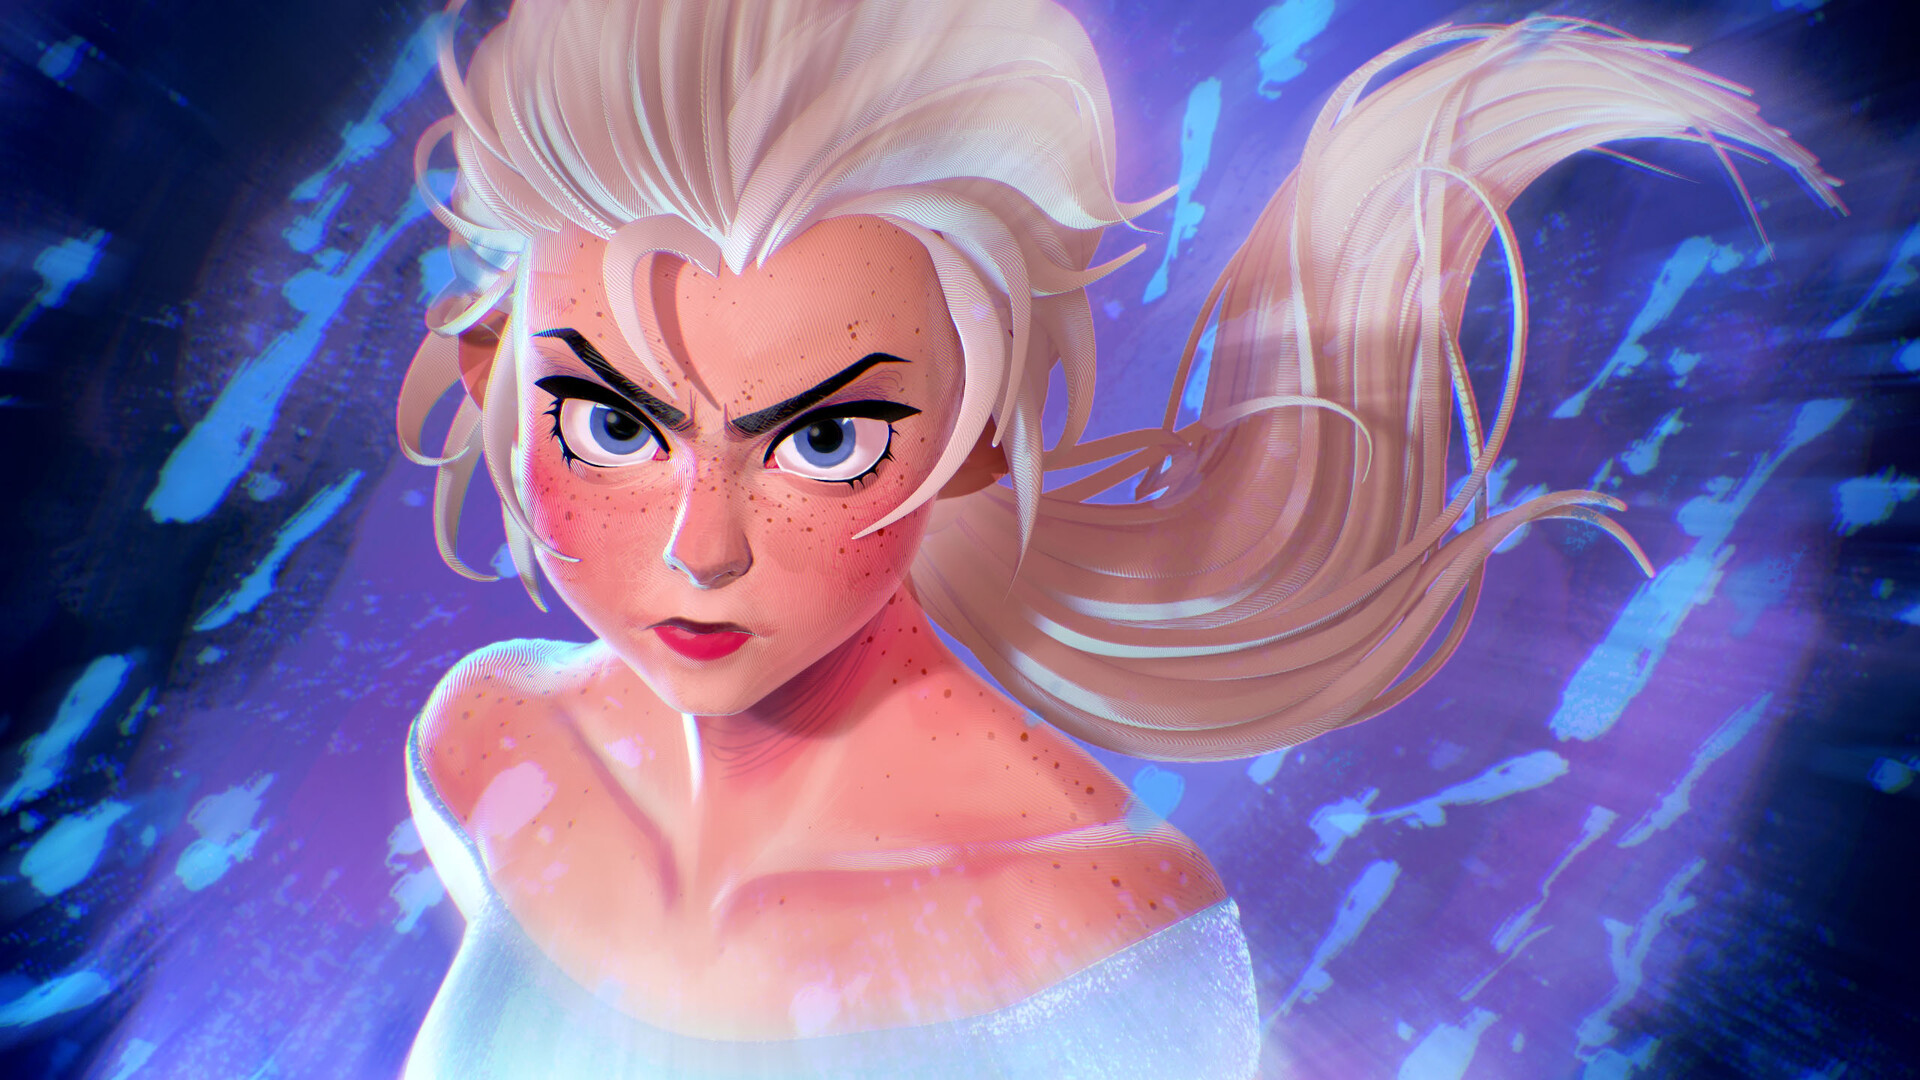 Mobile wallpaper: Blue Eyes, Movie, White Hair, Elsa (Frozen), Frozen 2,  967880 download the picture for free.